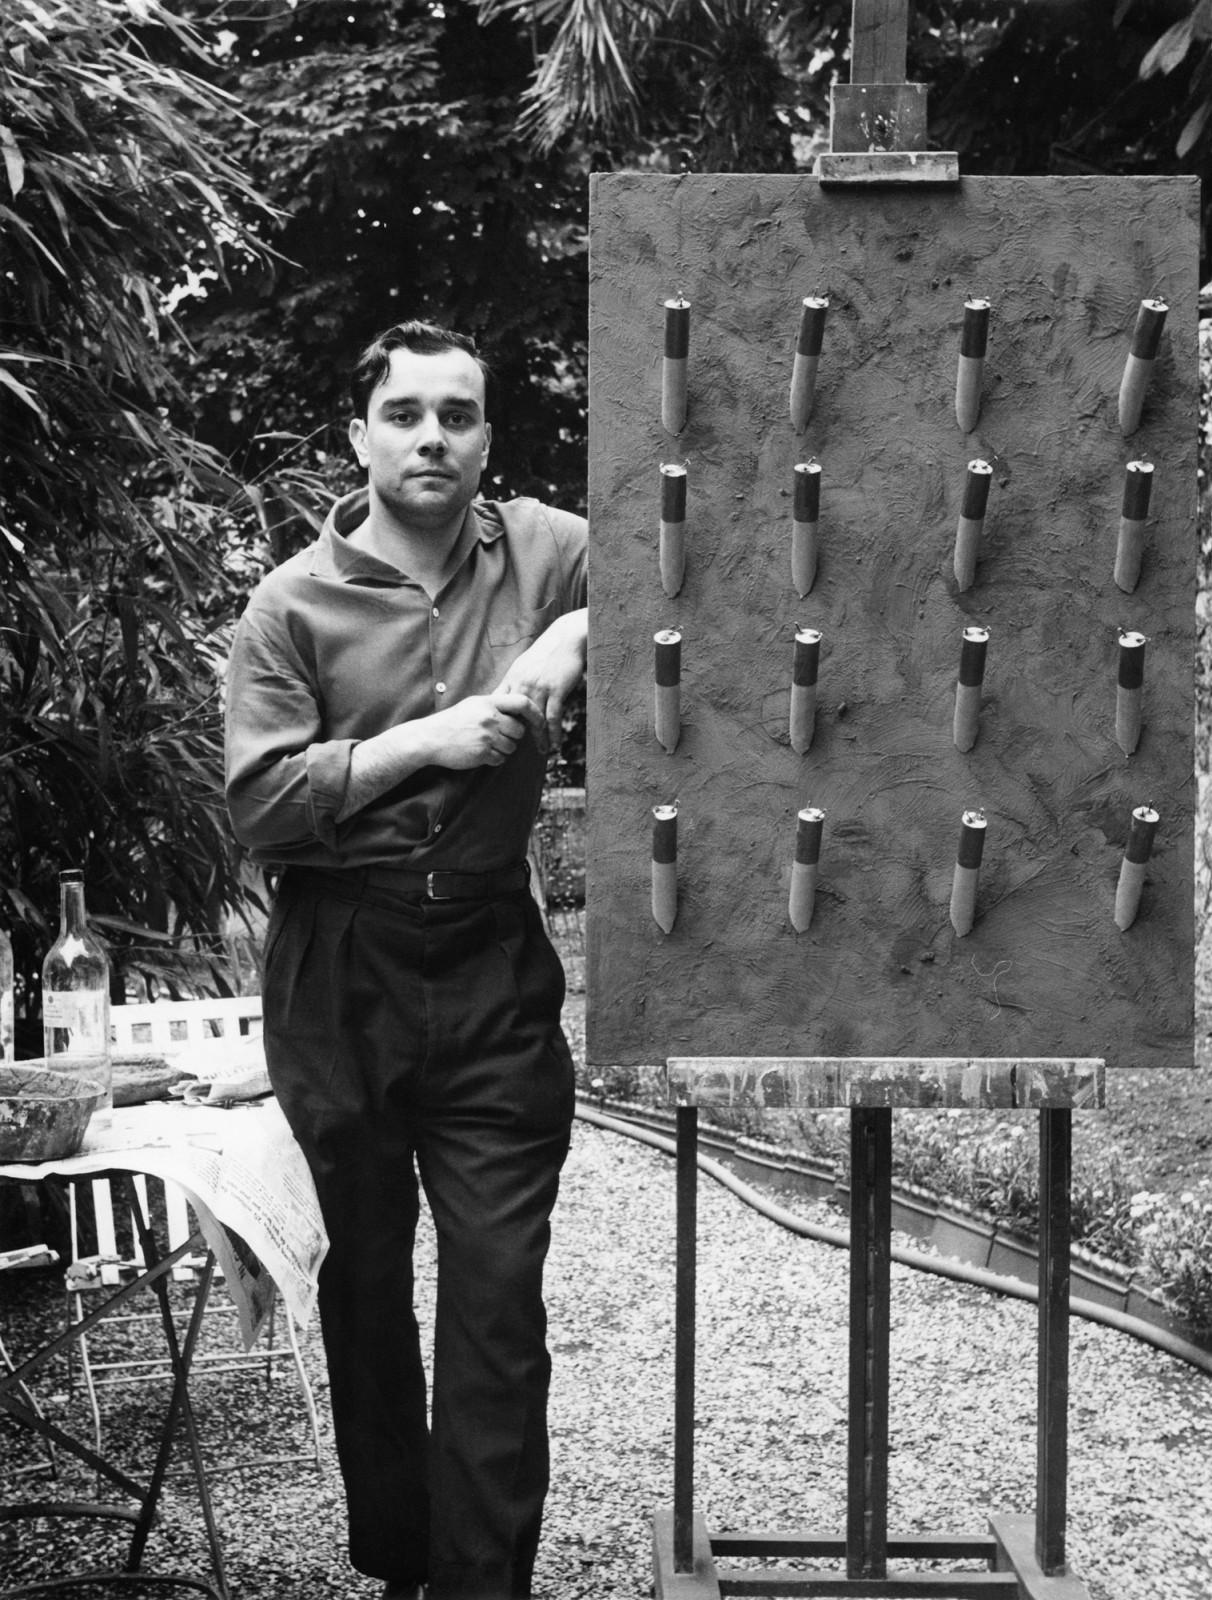 Yves Klein next to the "Tableau de Feu bleu d'une minute" (M 41) presented during the exhibition "Yves Klein: Monochrome Proposals" at the Galerie Colette Allendy